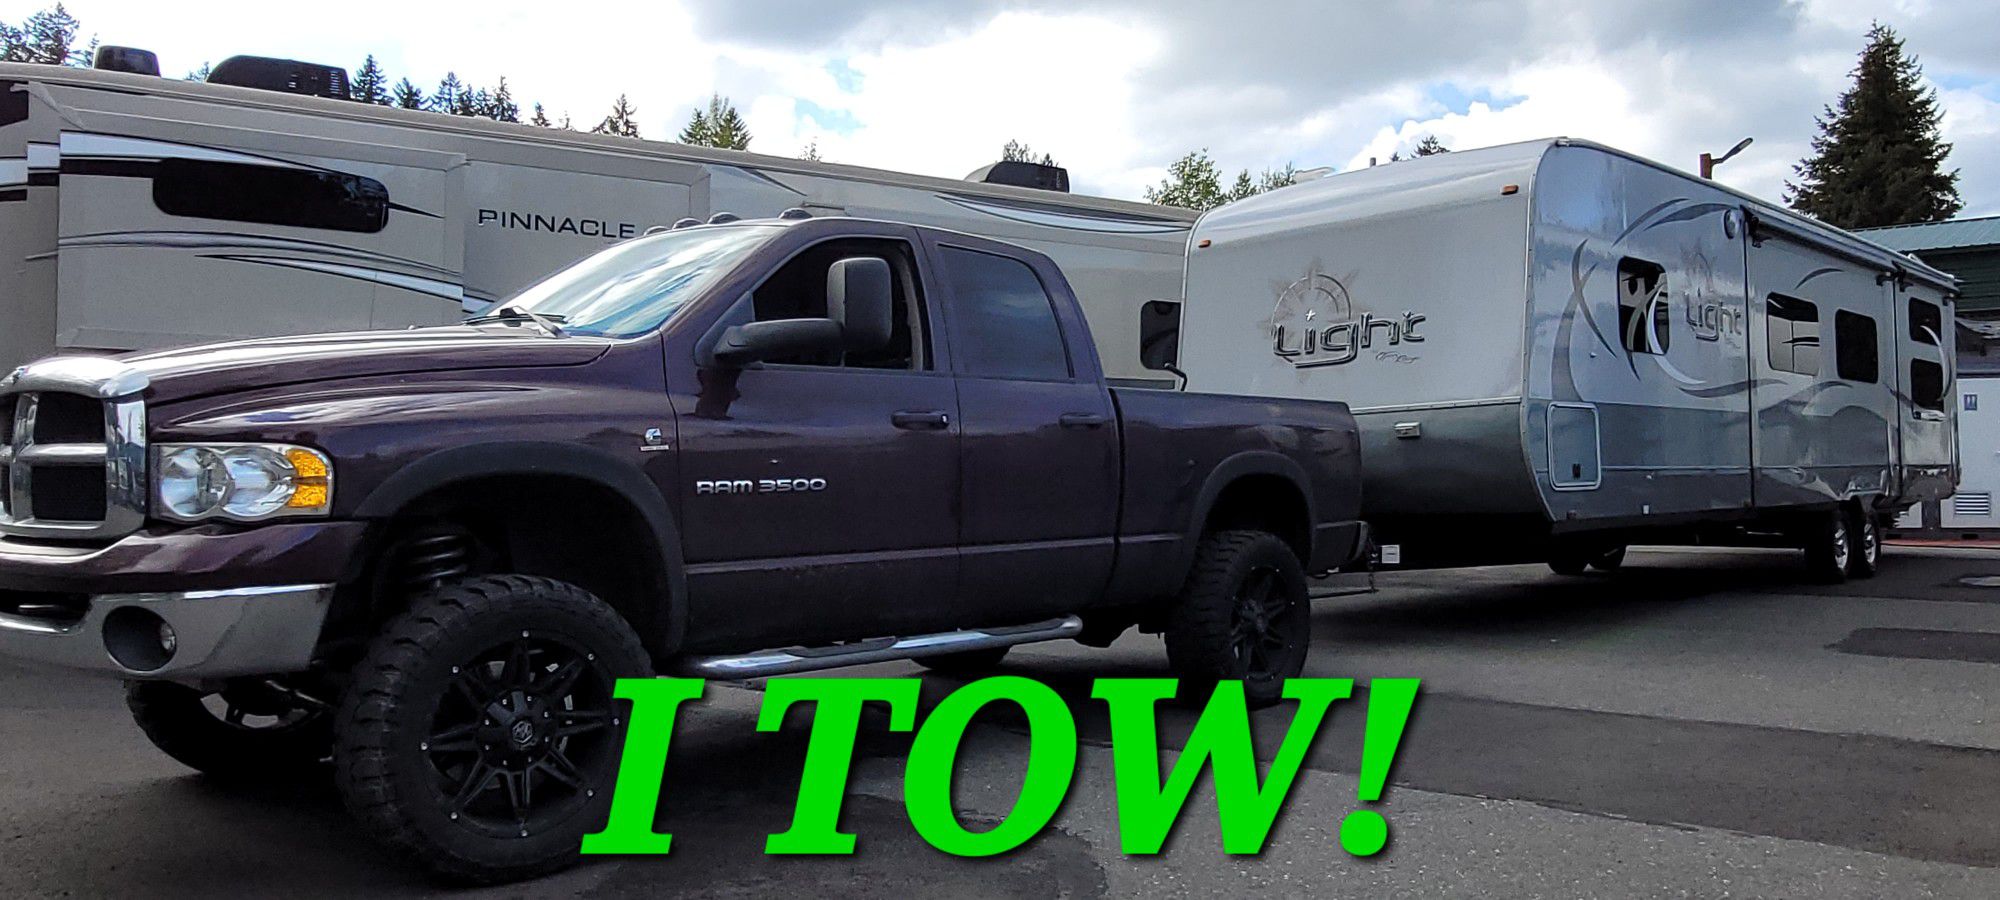 Towing Needed?? We Can Help!